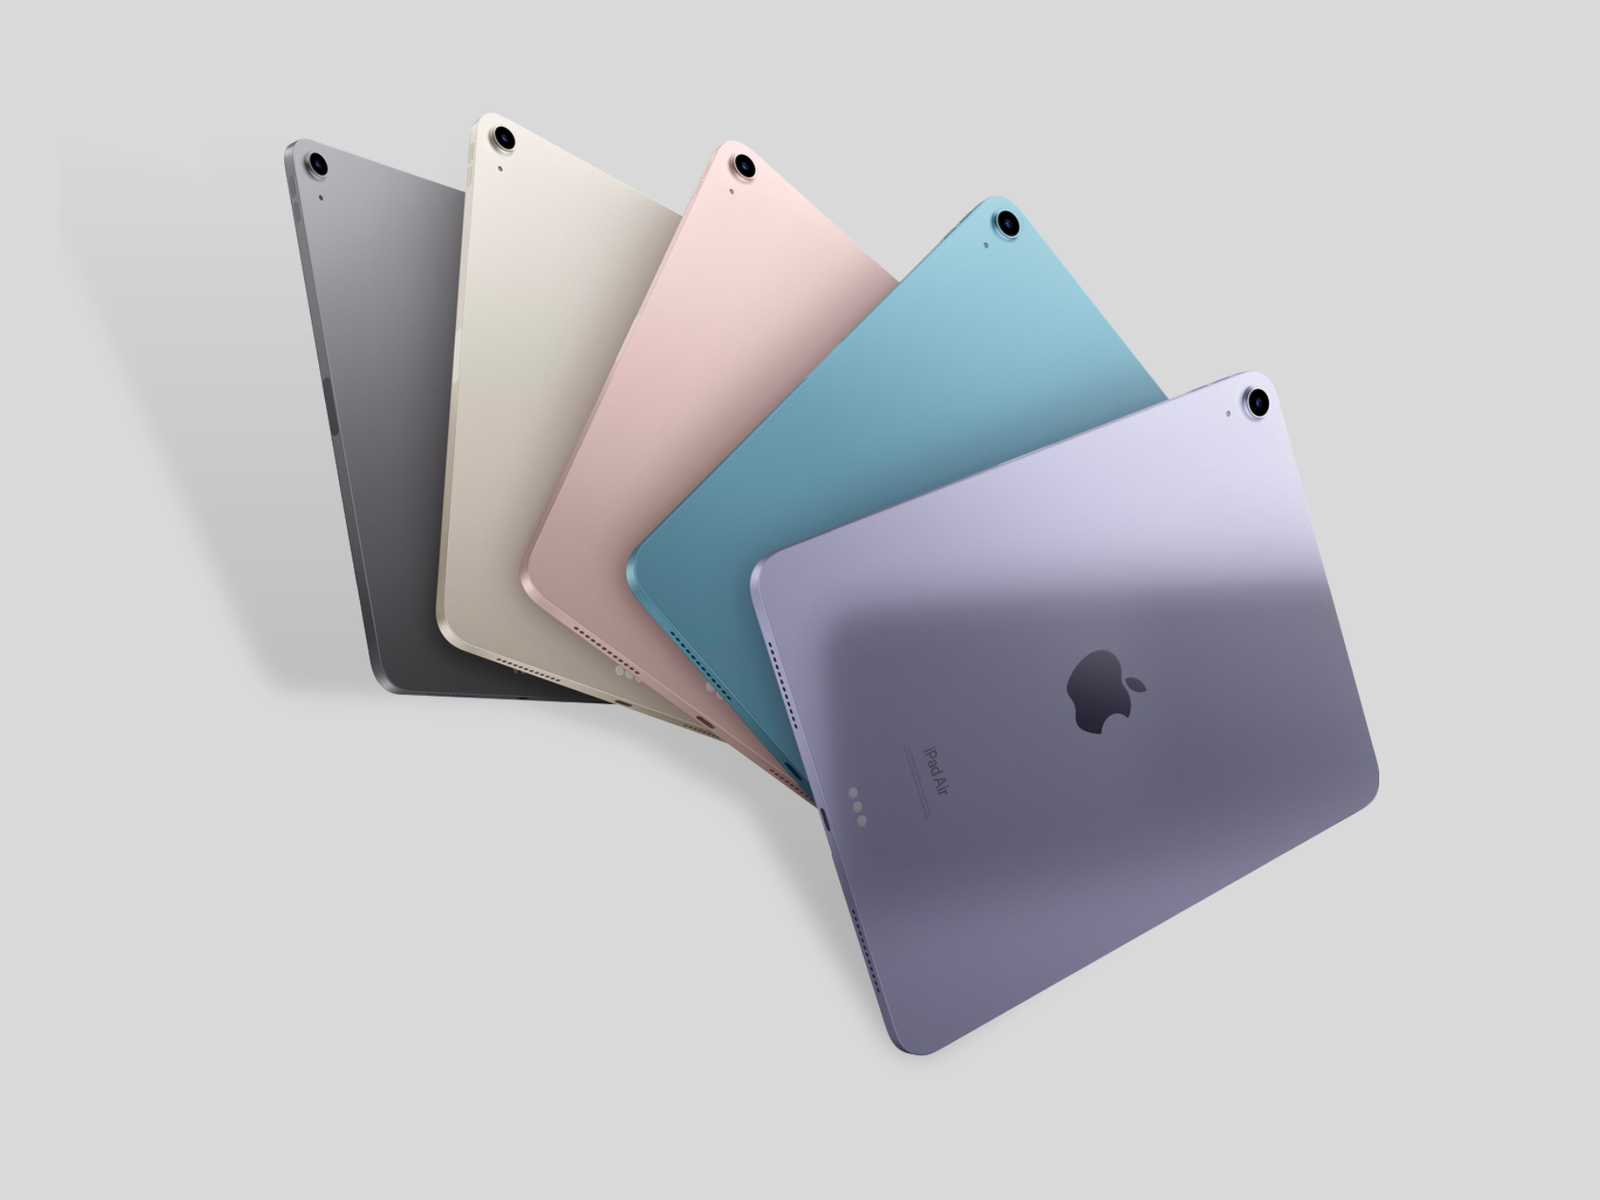 Why wait for new iPads? Get the 10.9-inch iPad Air for $100 less right now